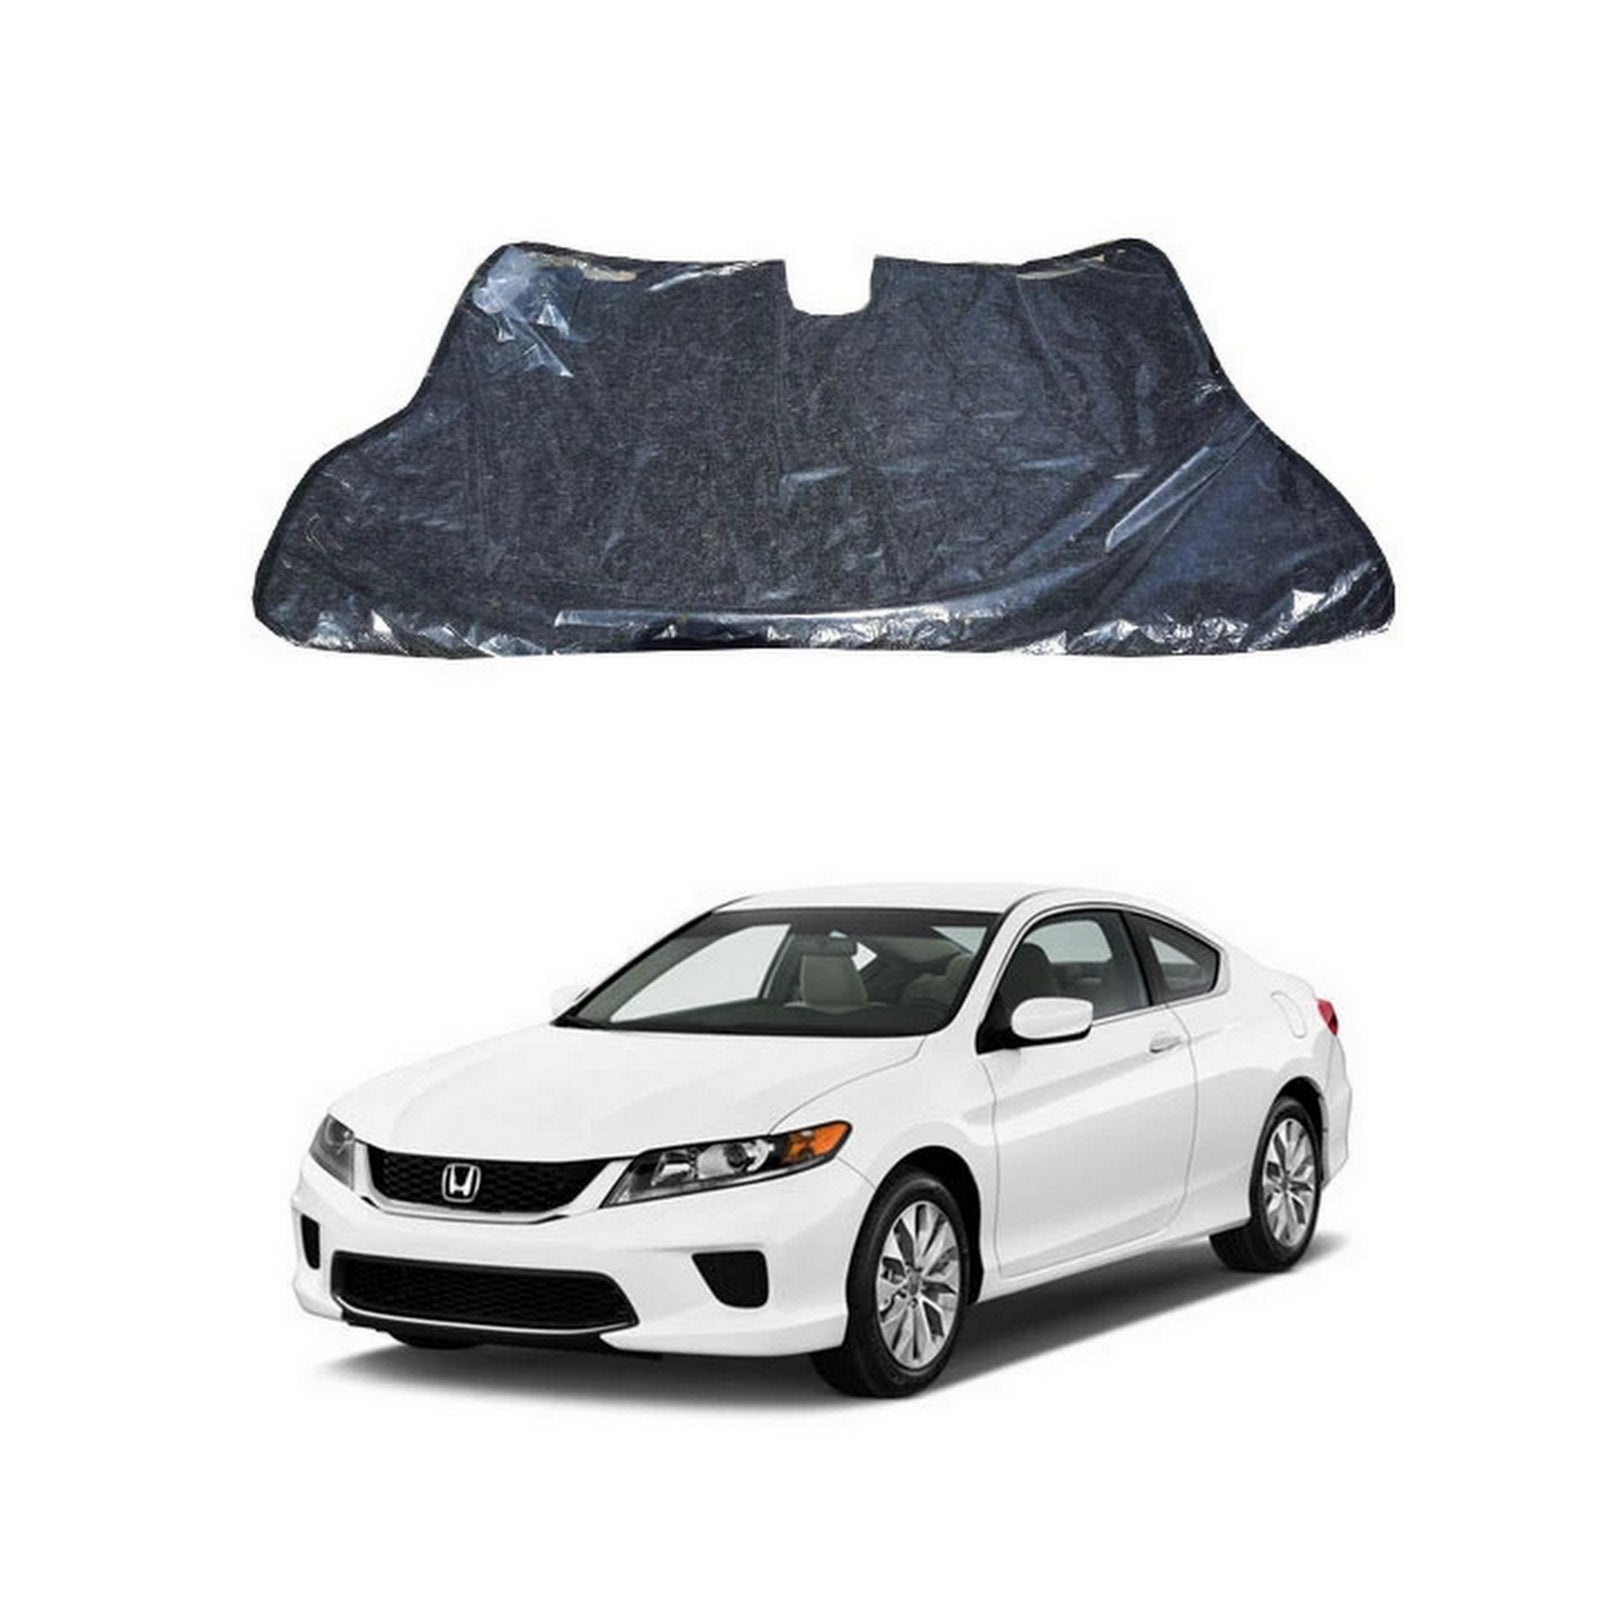 TRUNK LINER PROTECTOR FOR HONDA ACCORD